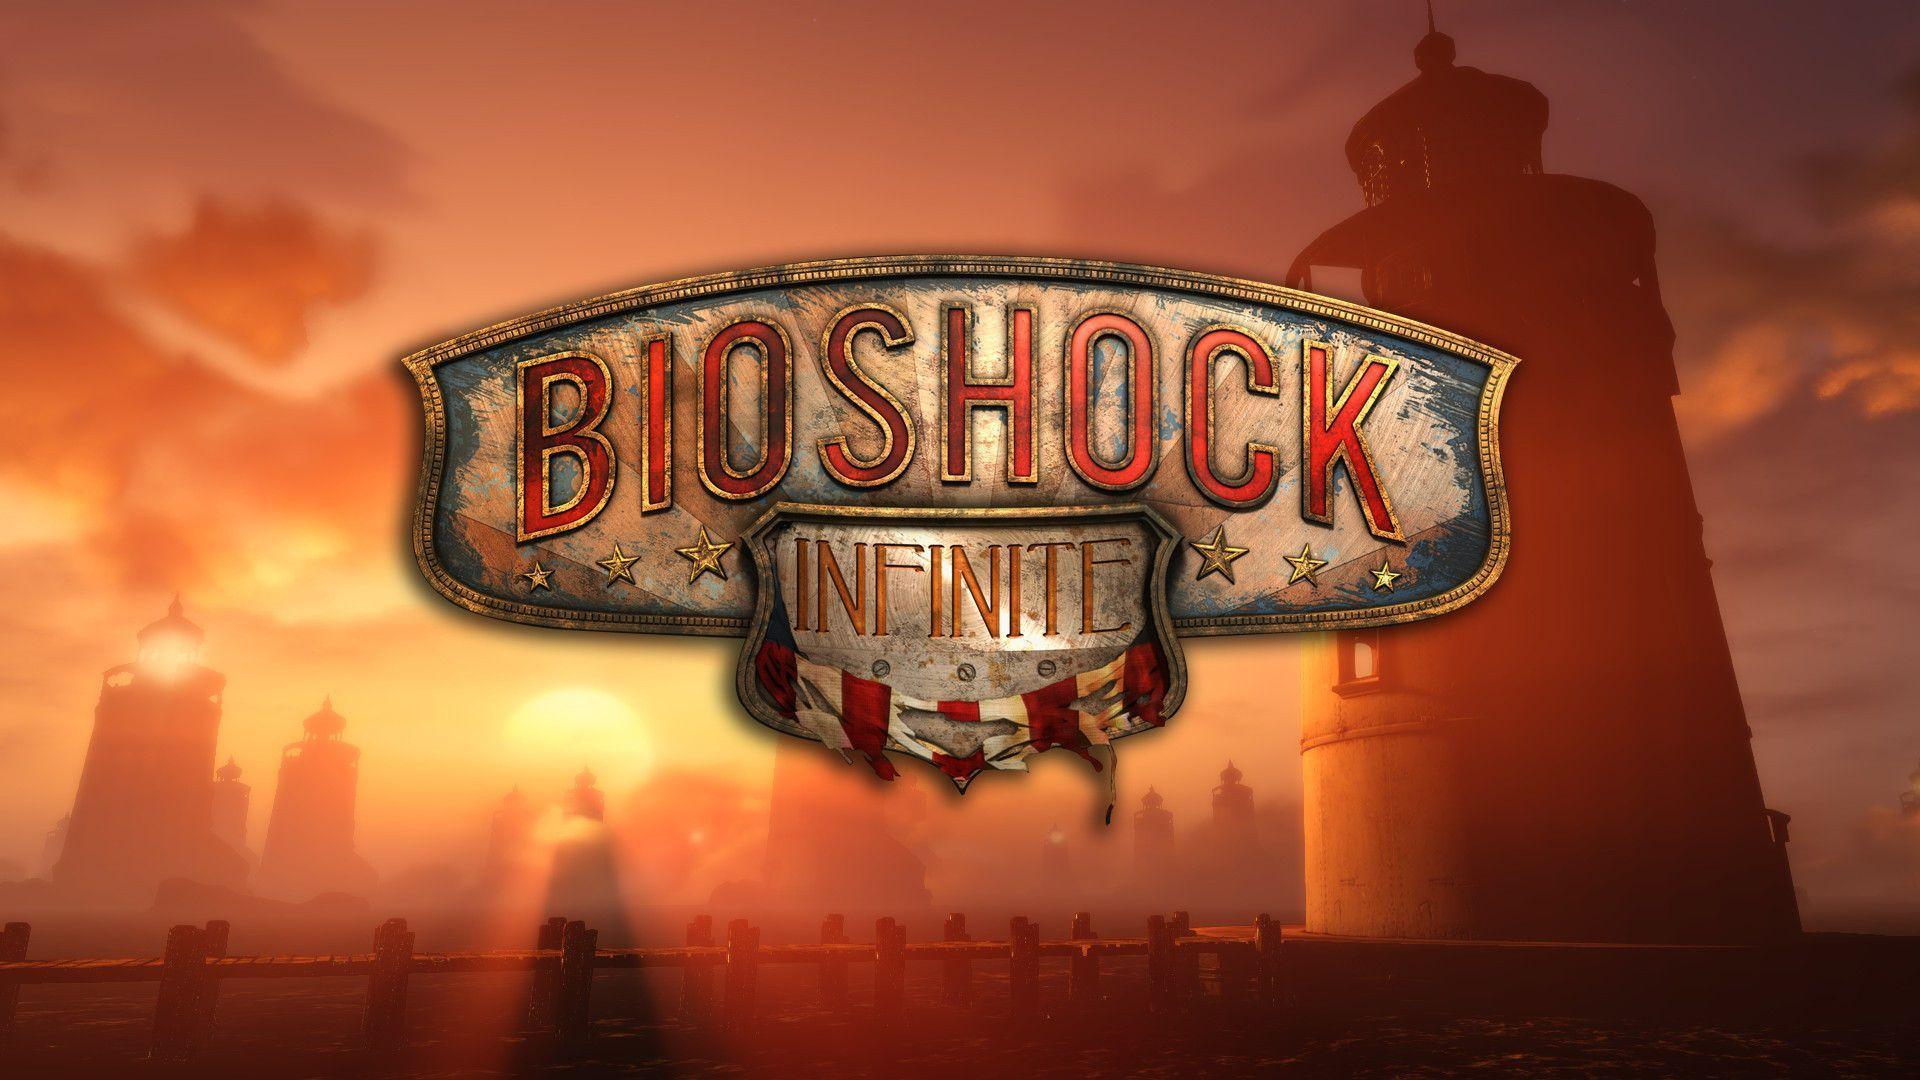 Could someone make a Bioshock Infinite wallpapers with infinite